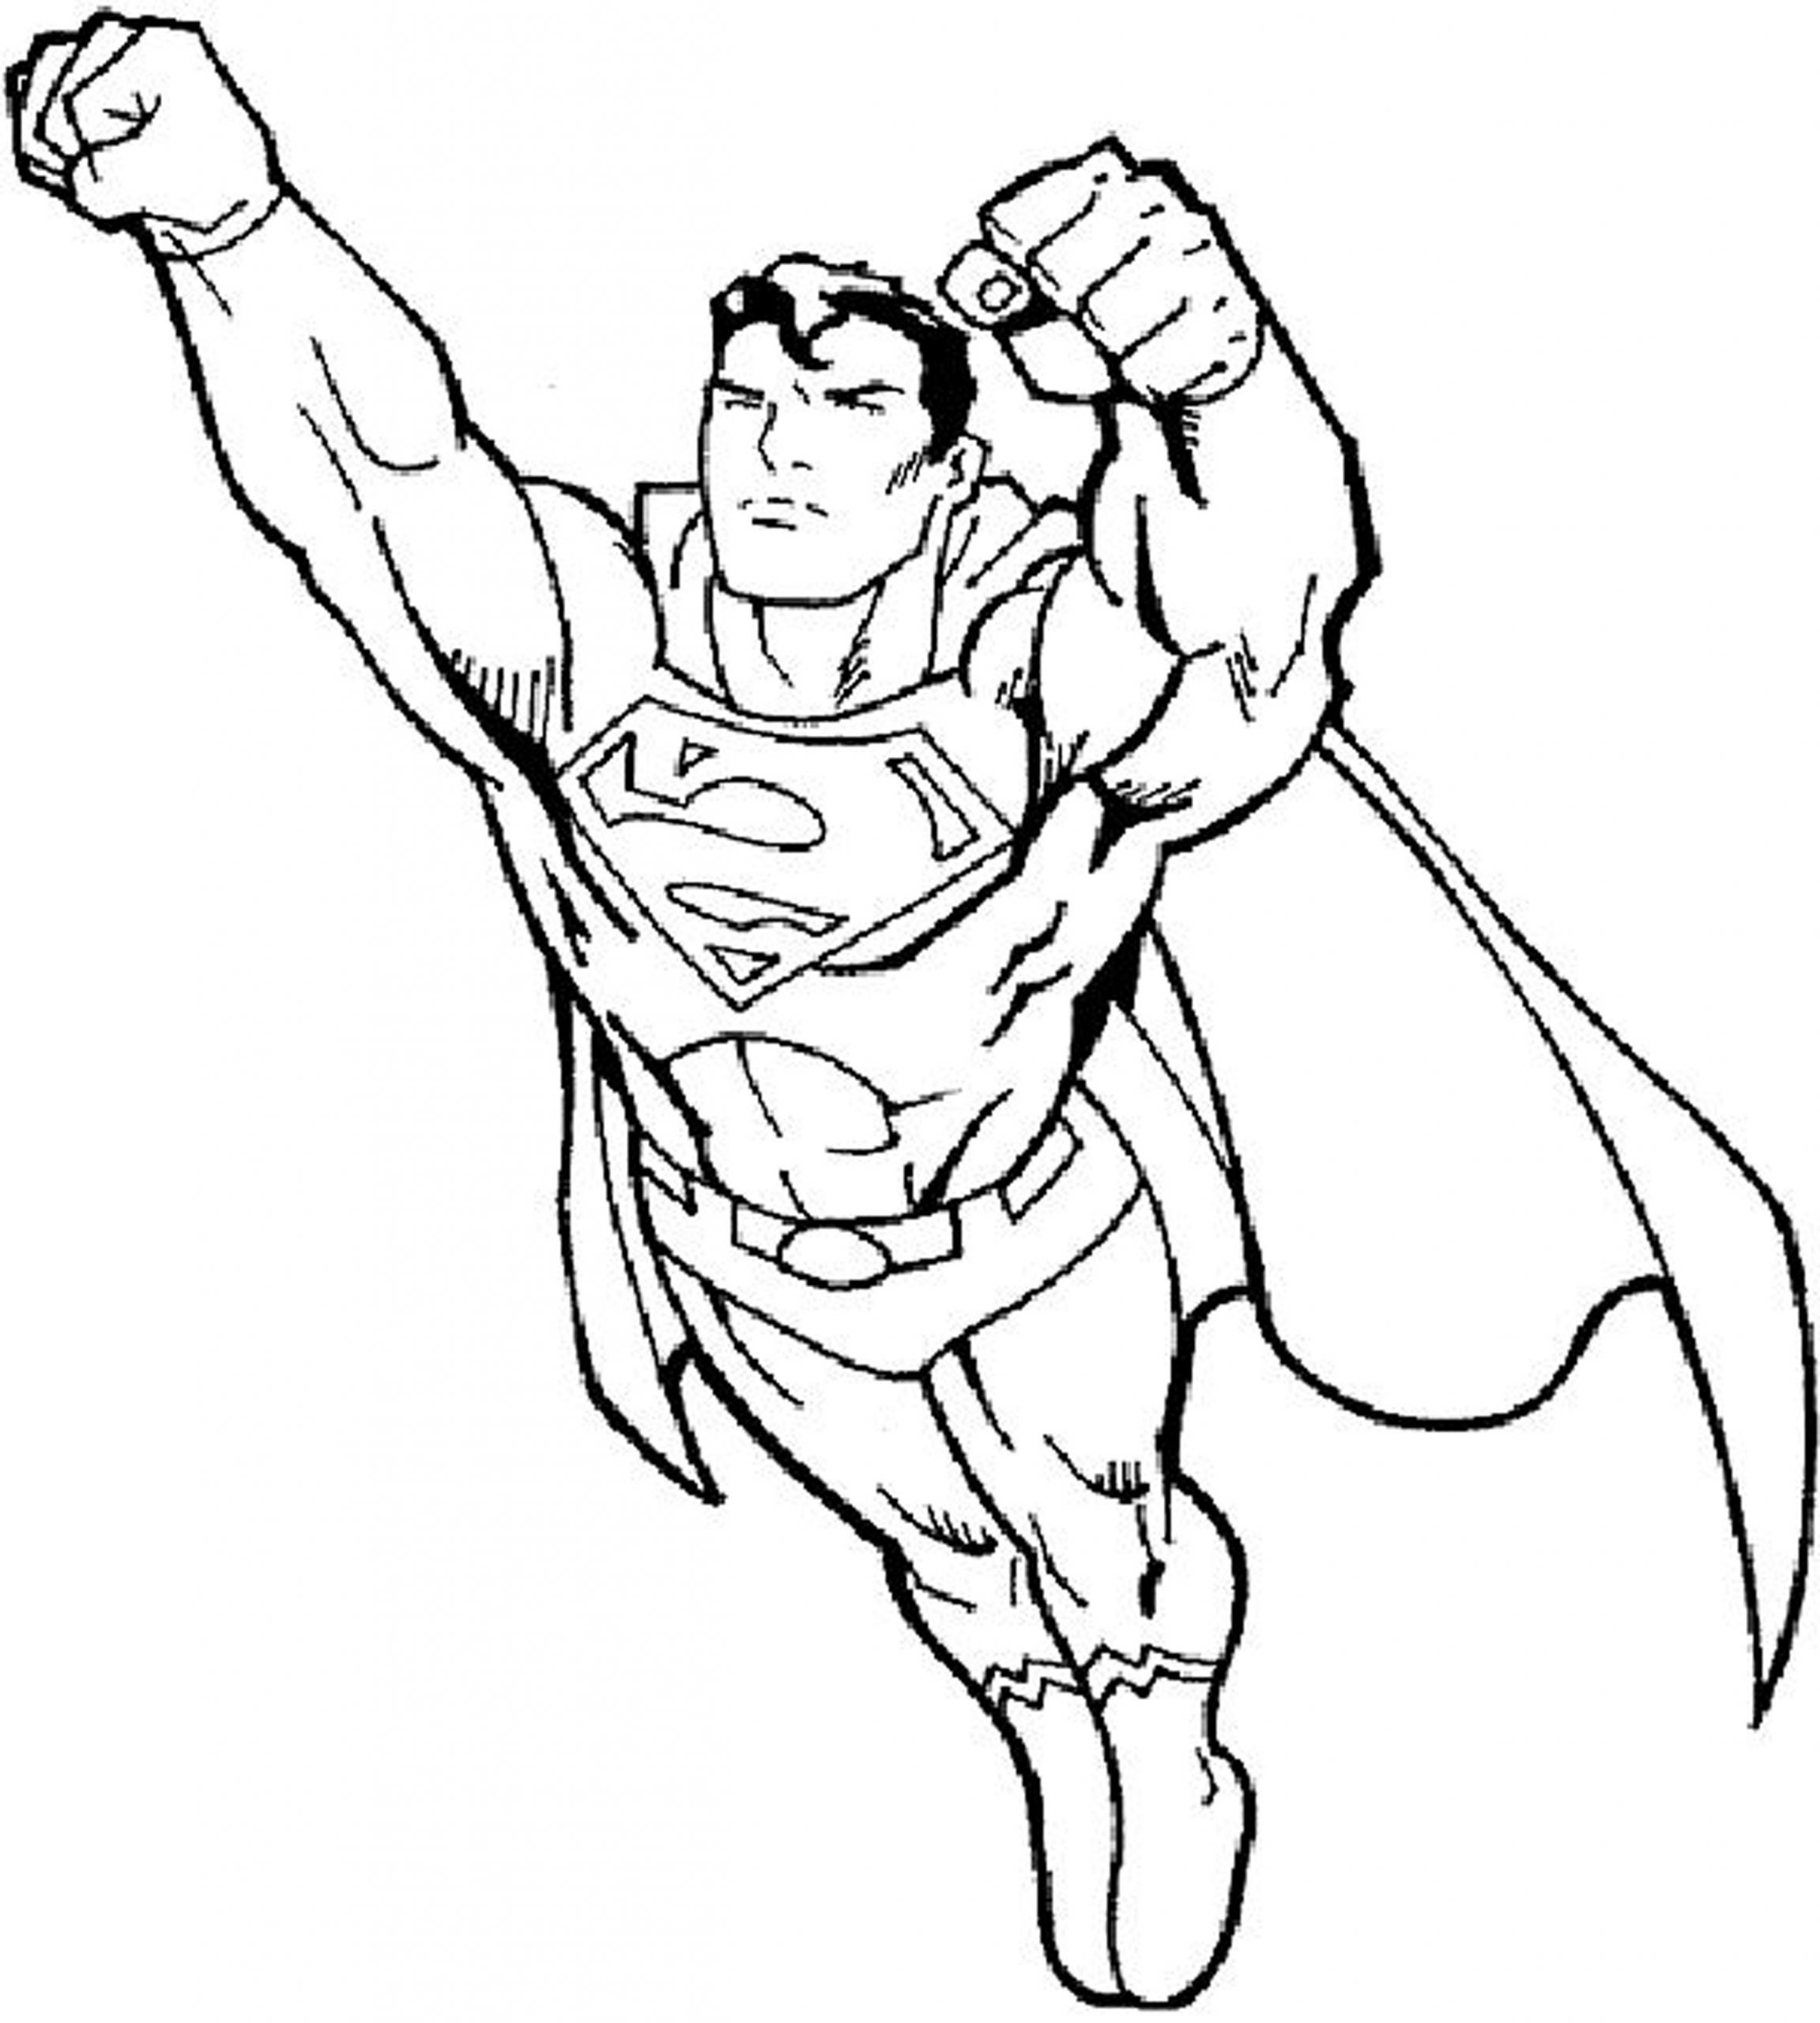 Free Boys Coloring Pages
 Coloring Pages Free Printable Coloring Pages For Boys